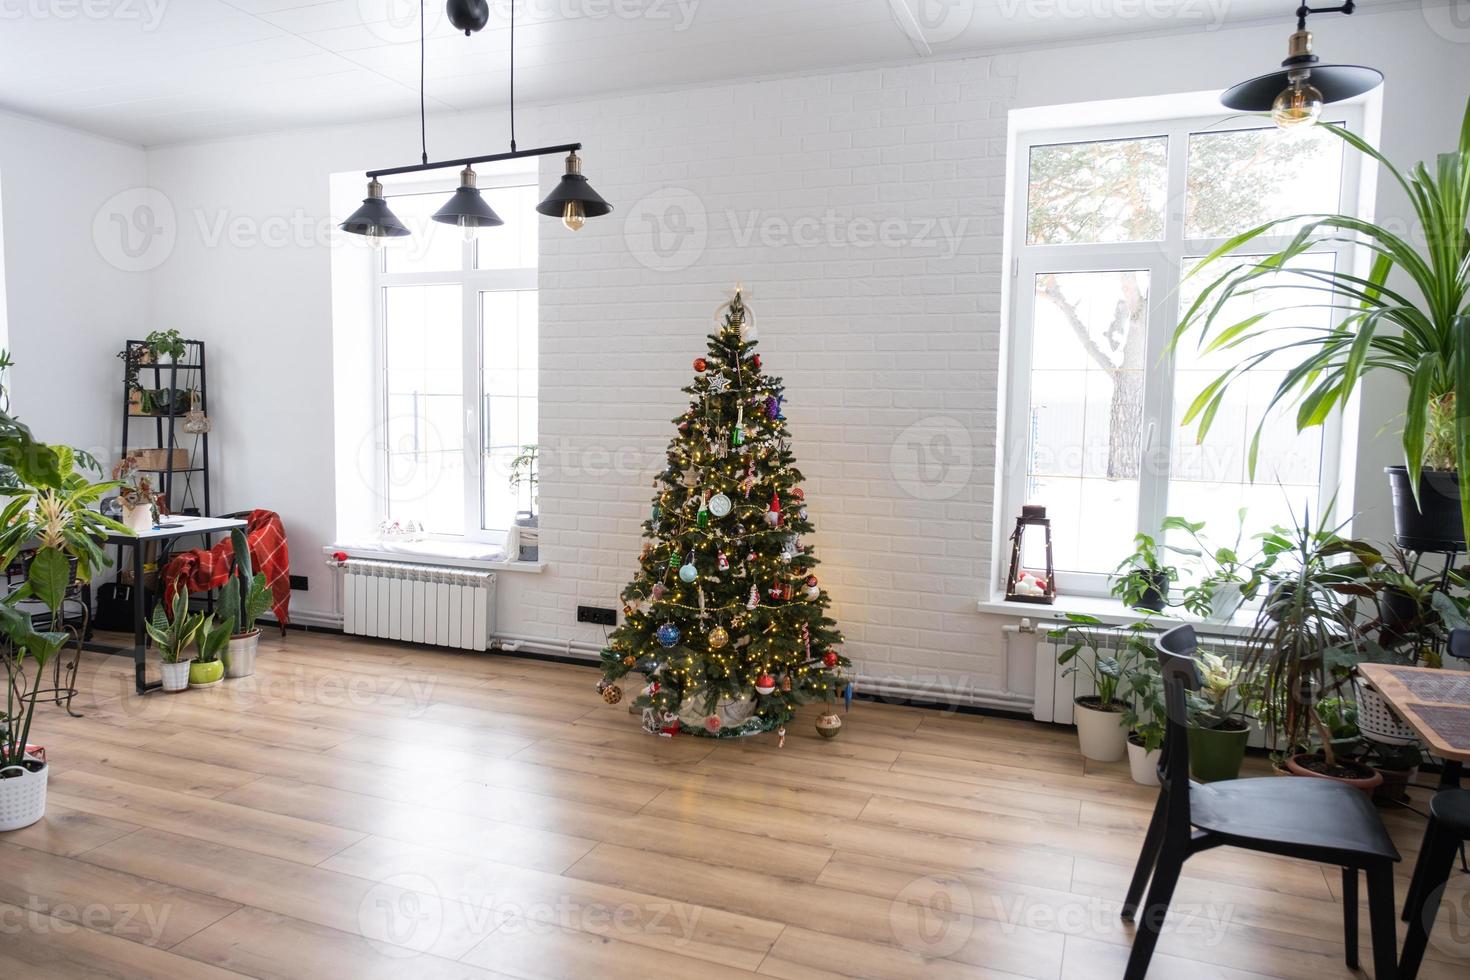 Christmas tree in the white interior of a house with large windows. Glowing fairy lights garlands interior decoration of the studio room. Potted plants in the home photo